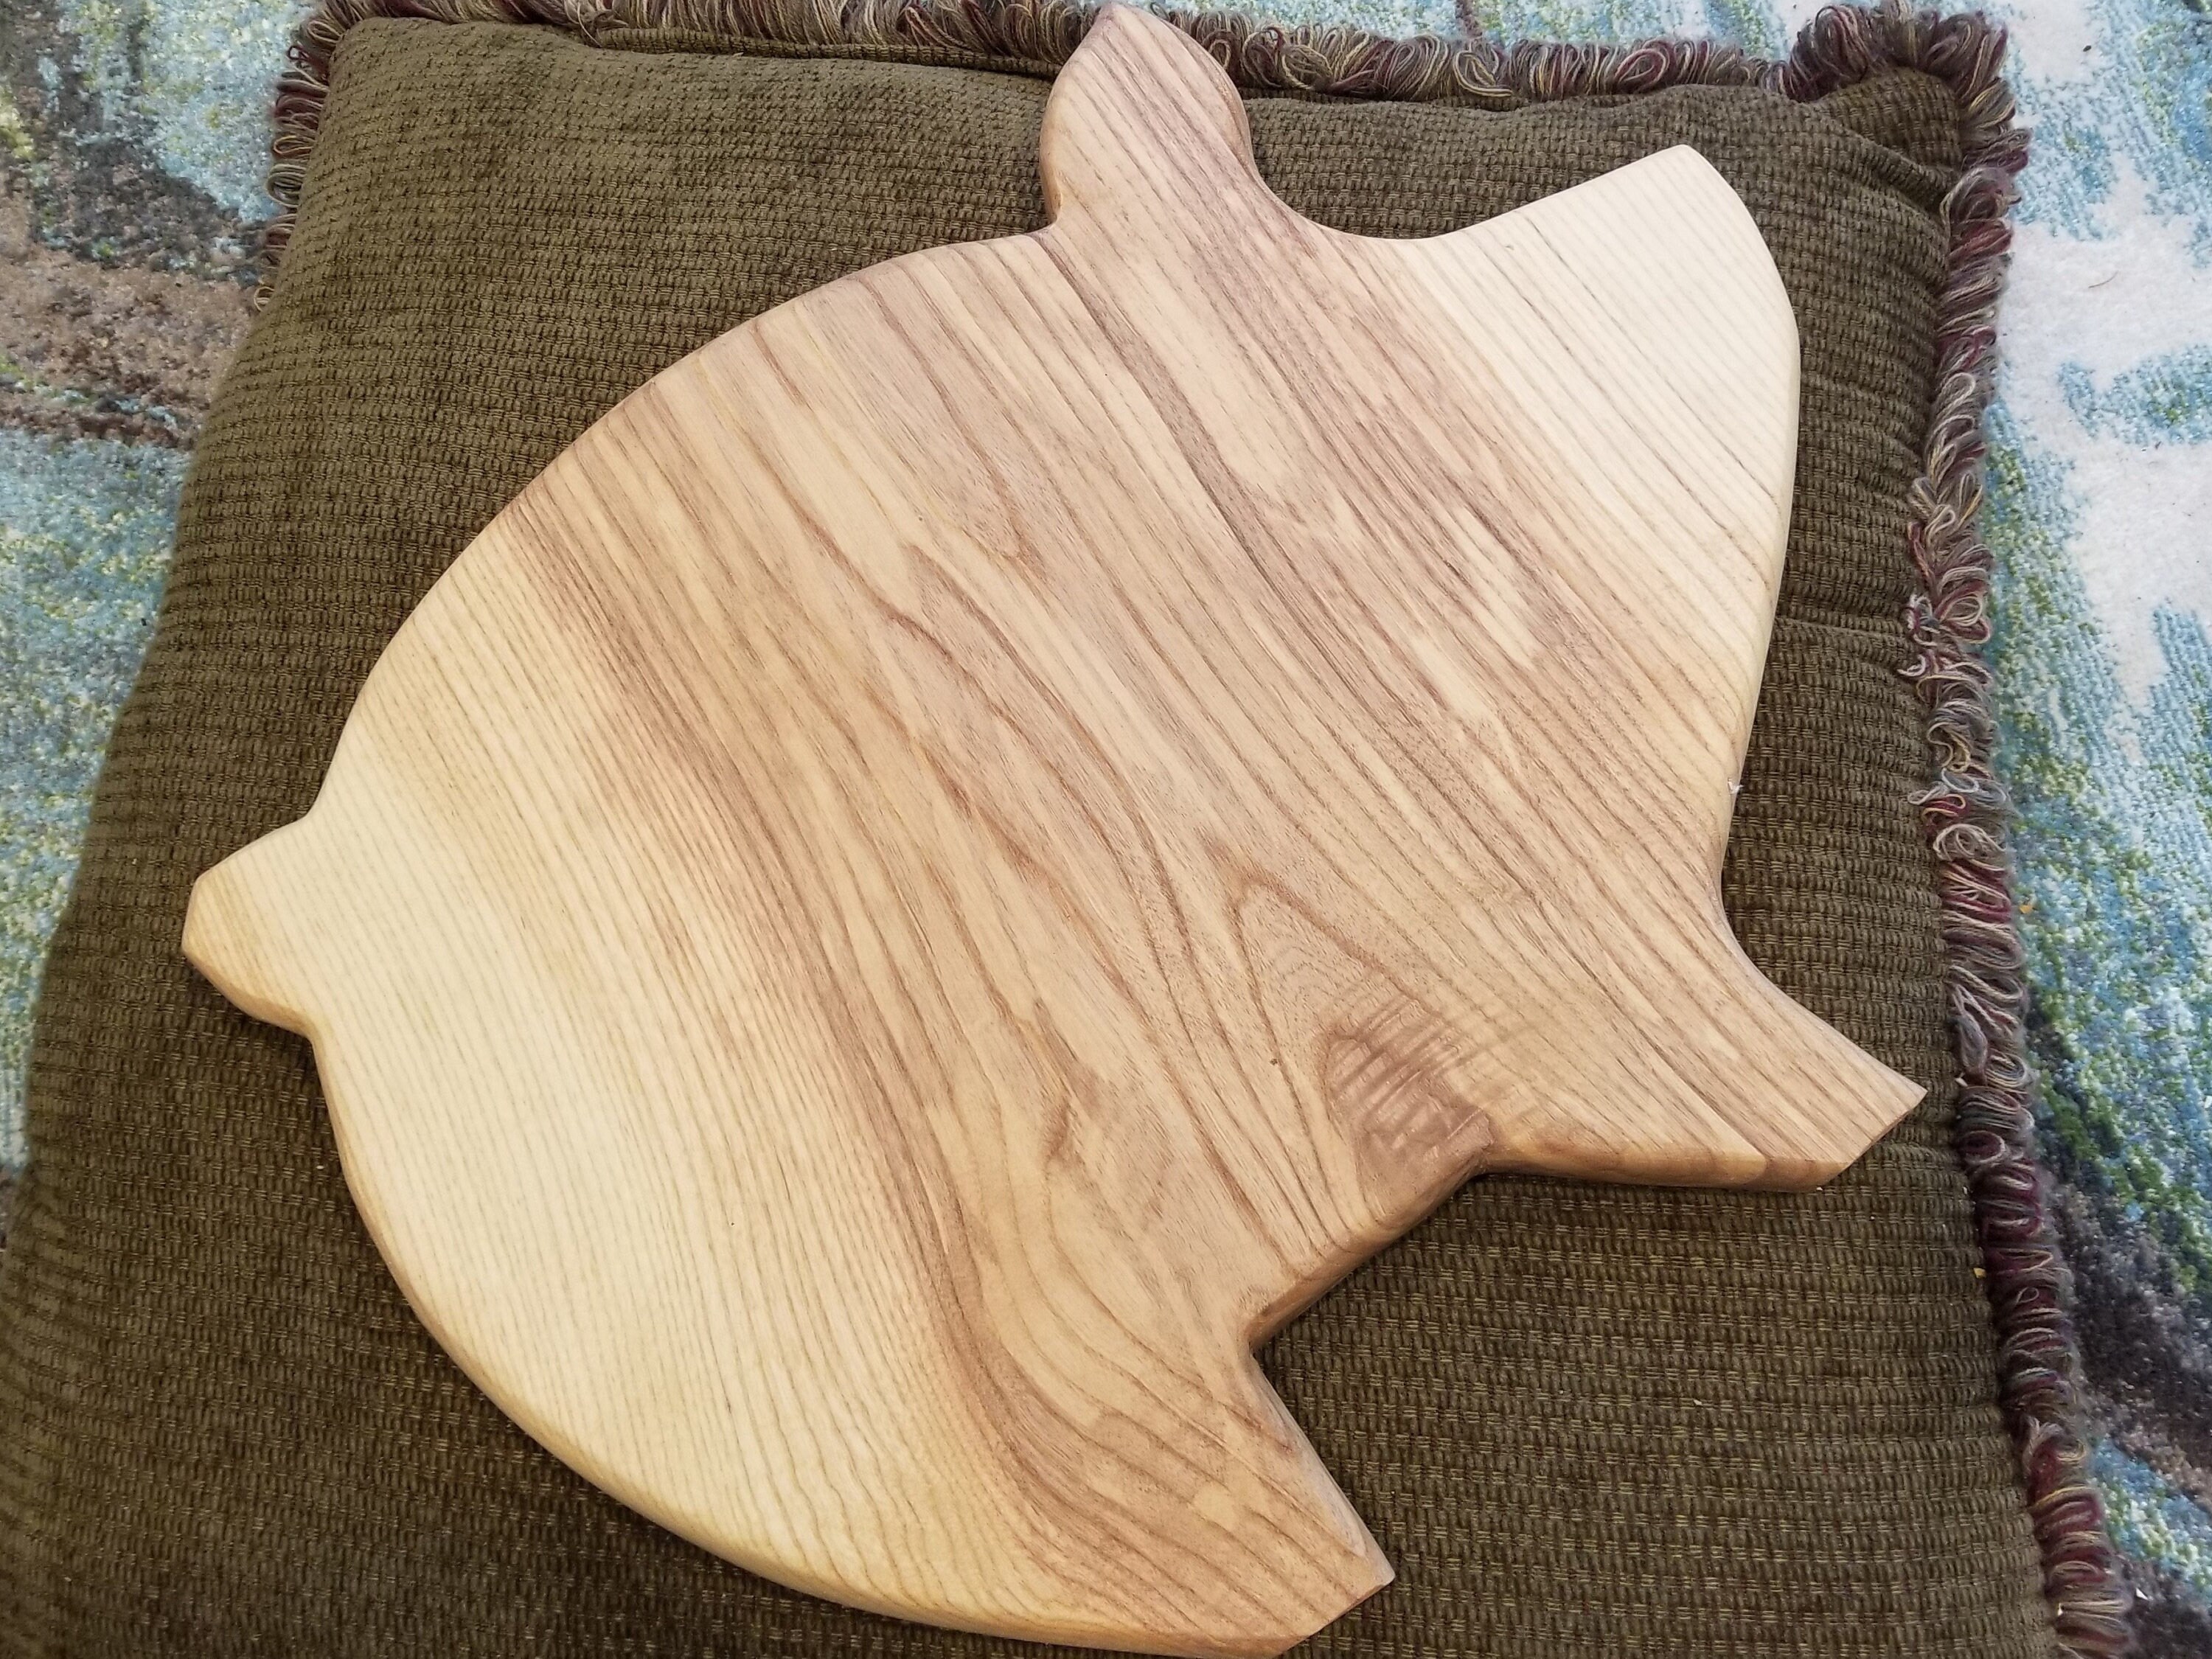 Grilling Themed Small Cutting Boards – The Cracked Pig